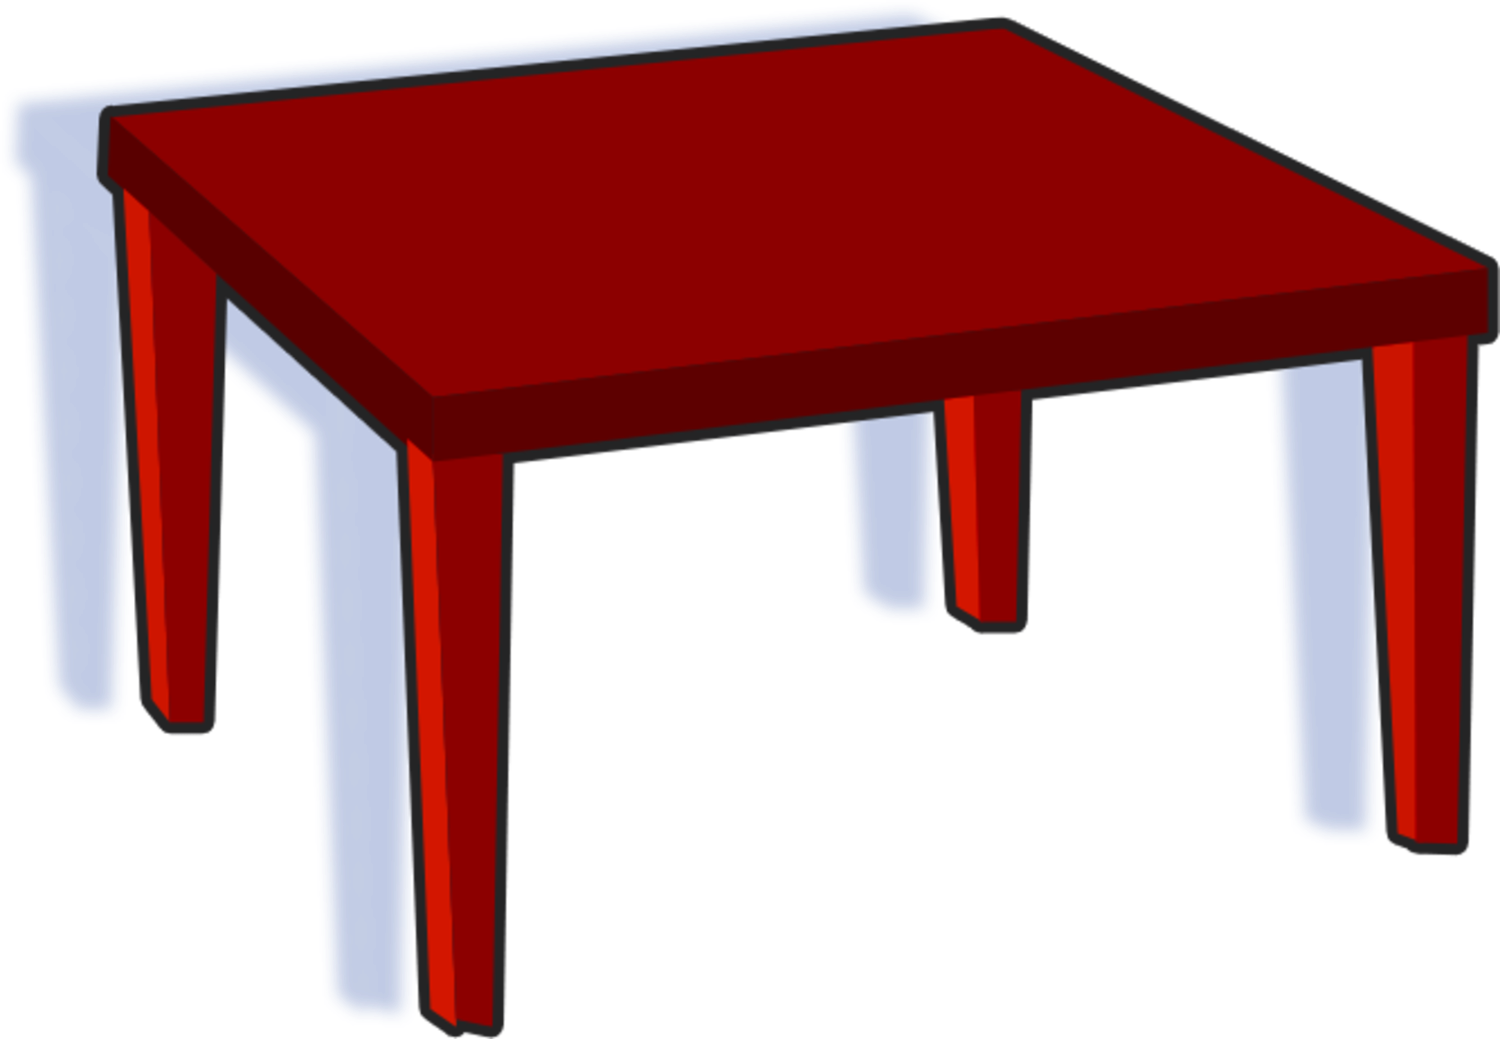 What is the height of the table?